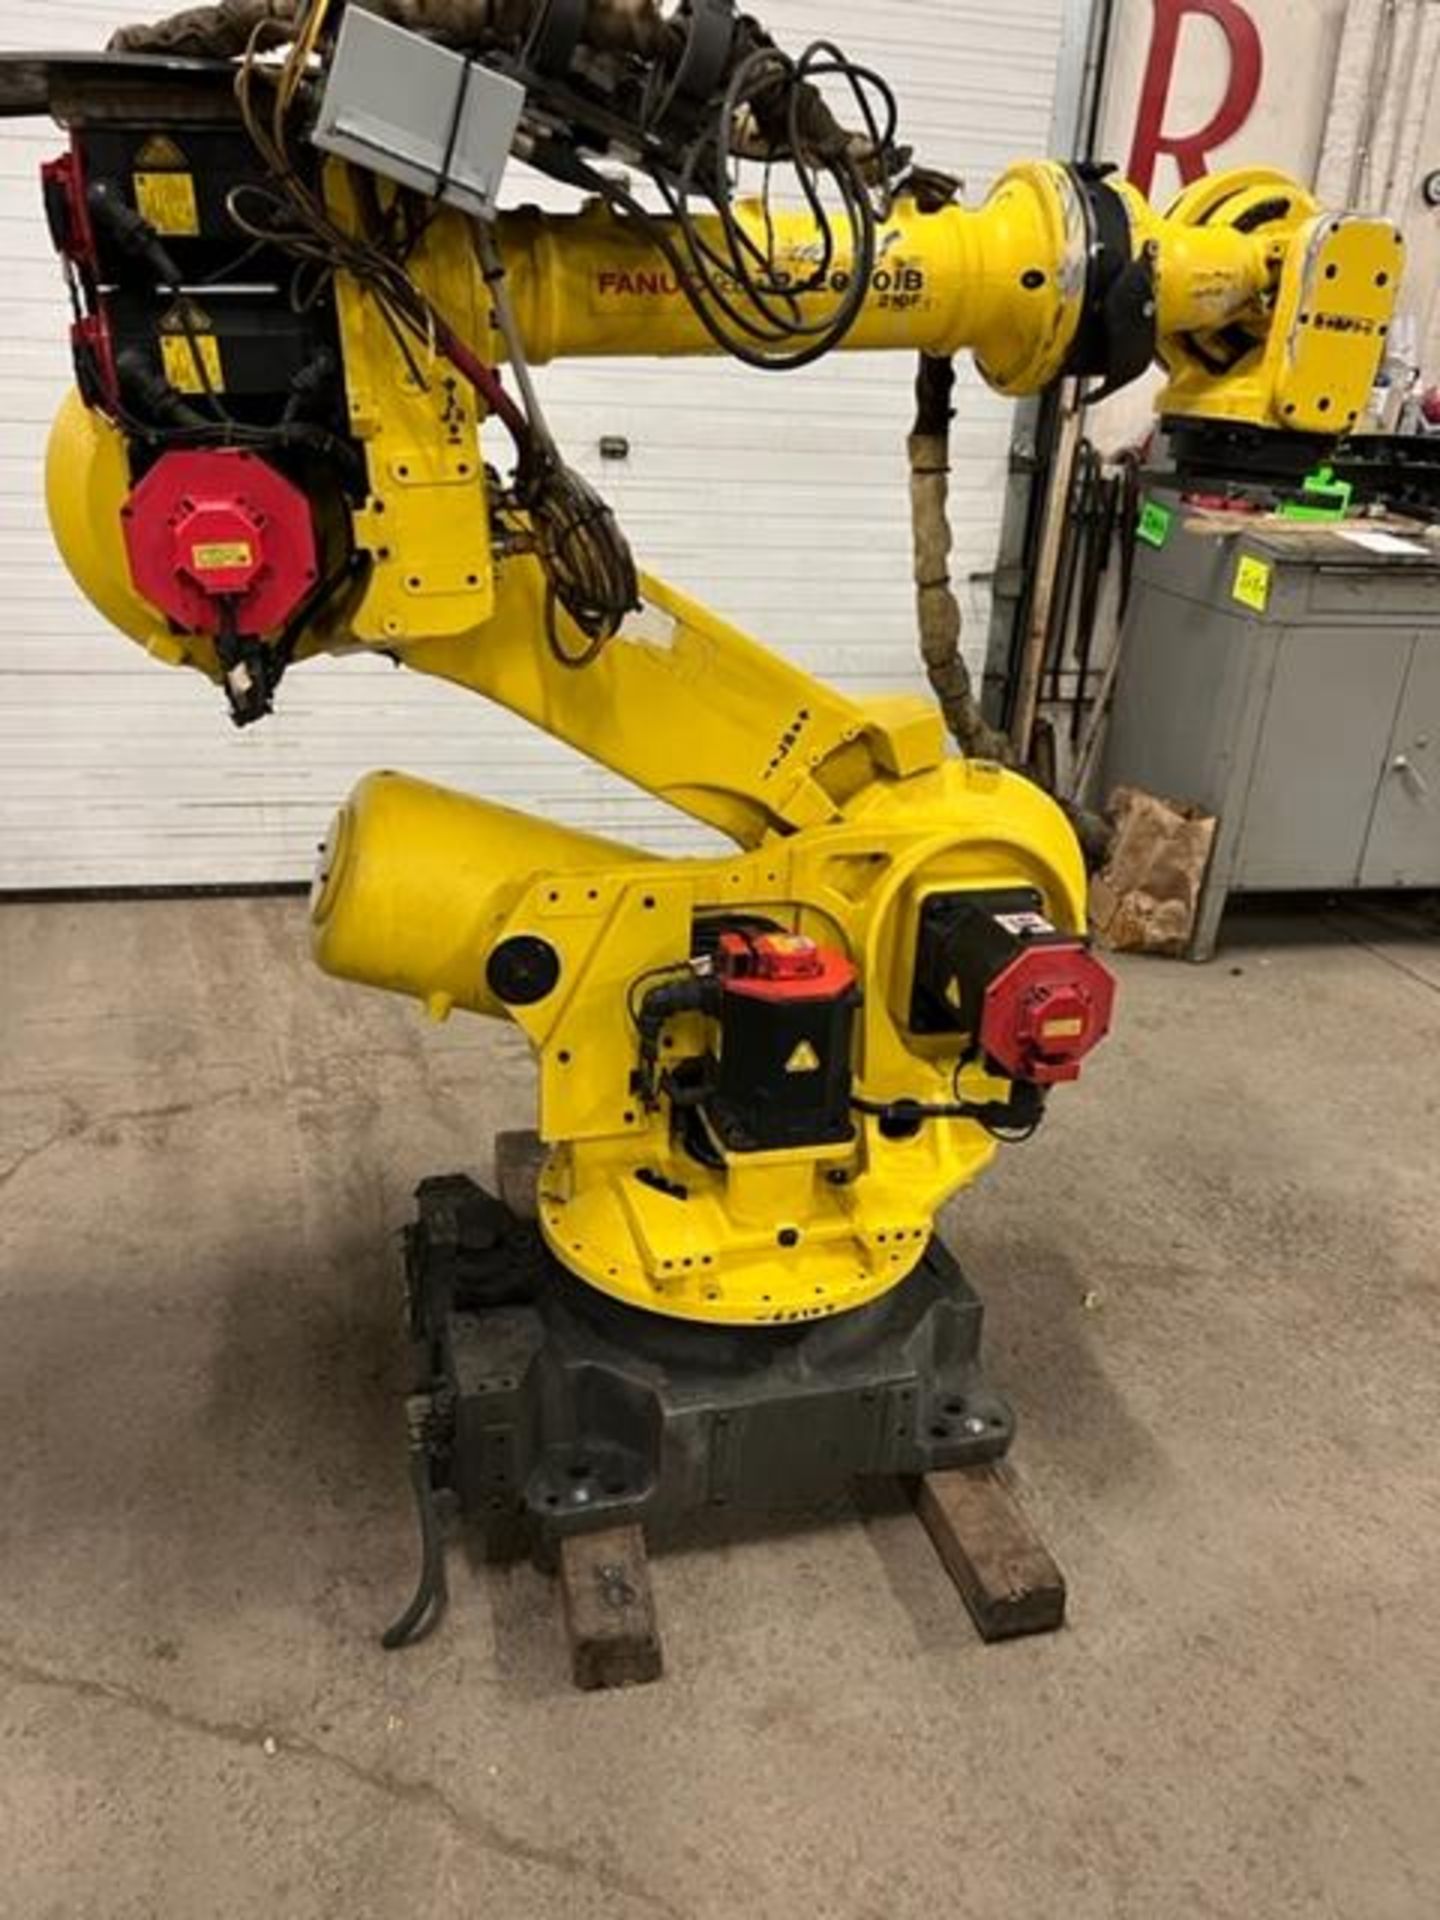 MINT 2012 Fanuc Handling Robot Model R-2000iB 210F - 210kg payload with R-30iA Controller and - Image 4 of 4